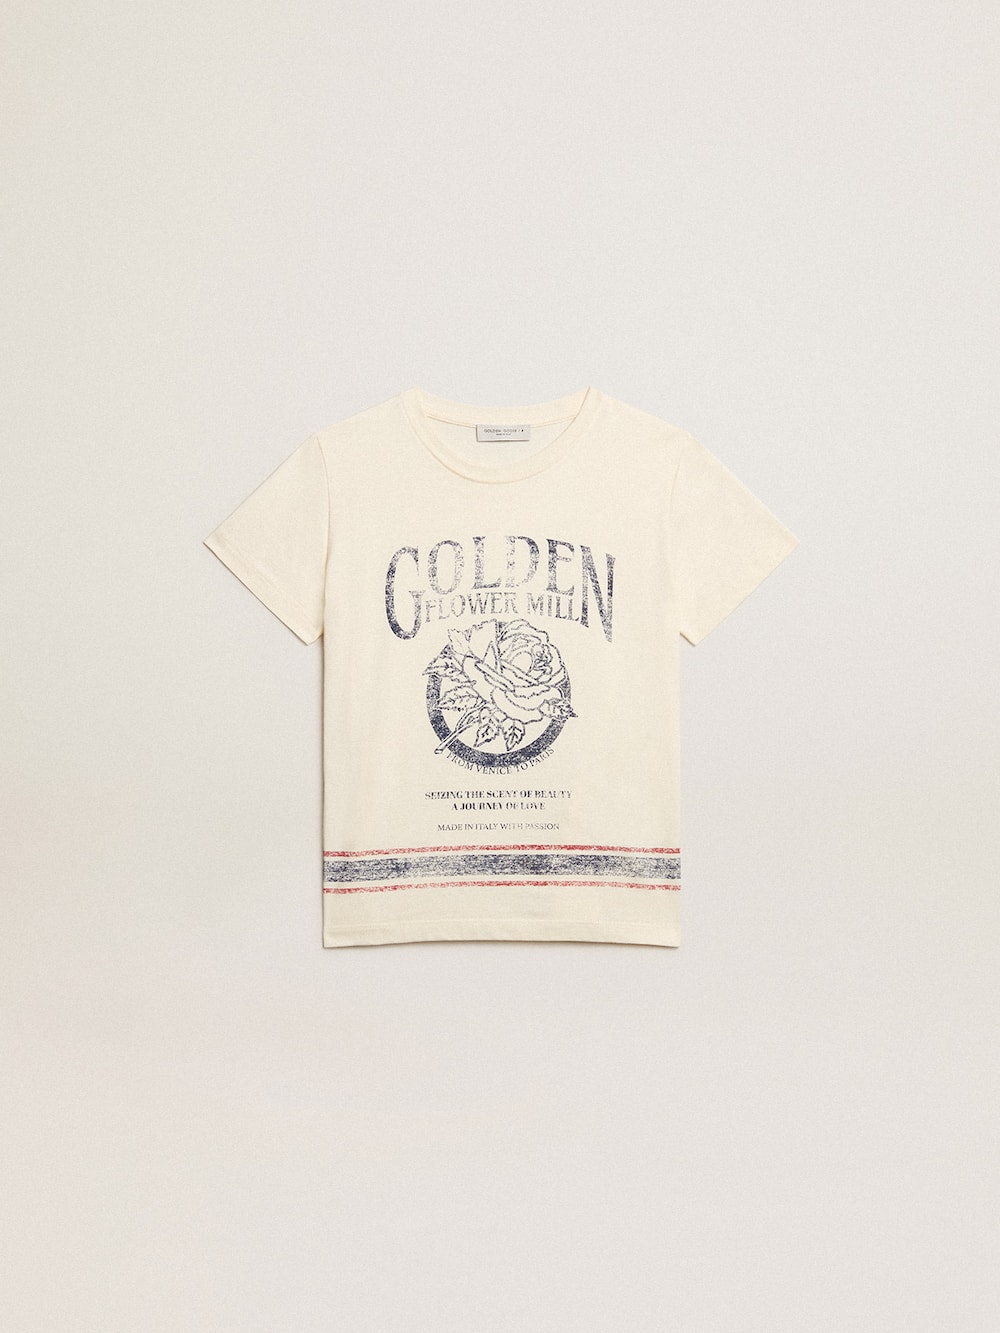 Golden Goose - Boys’ cotton T-shirt in aged white with faded print at the center in 